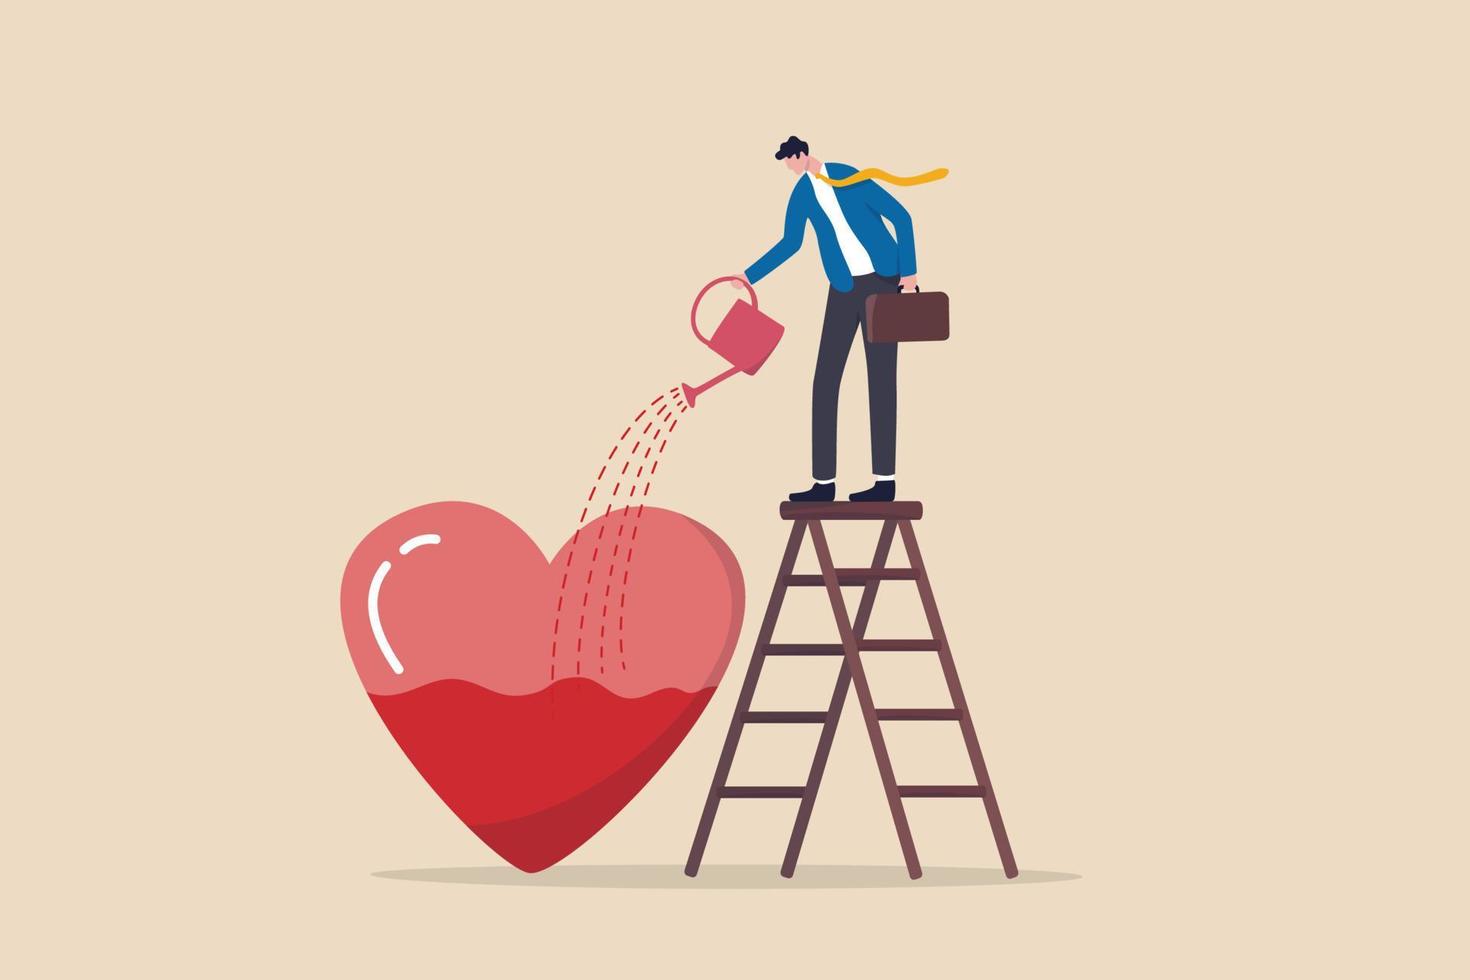 Work passion, motivation to success and win business competition, mindset or attitude to work in we love to do concept, businessman pouring water to fulfill heart shape metaphor of passion. vector